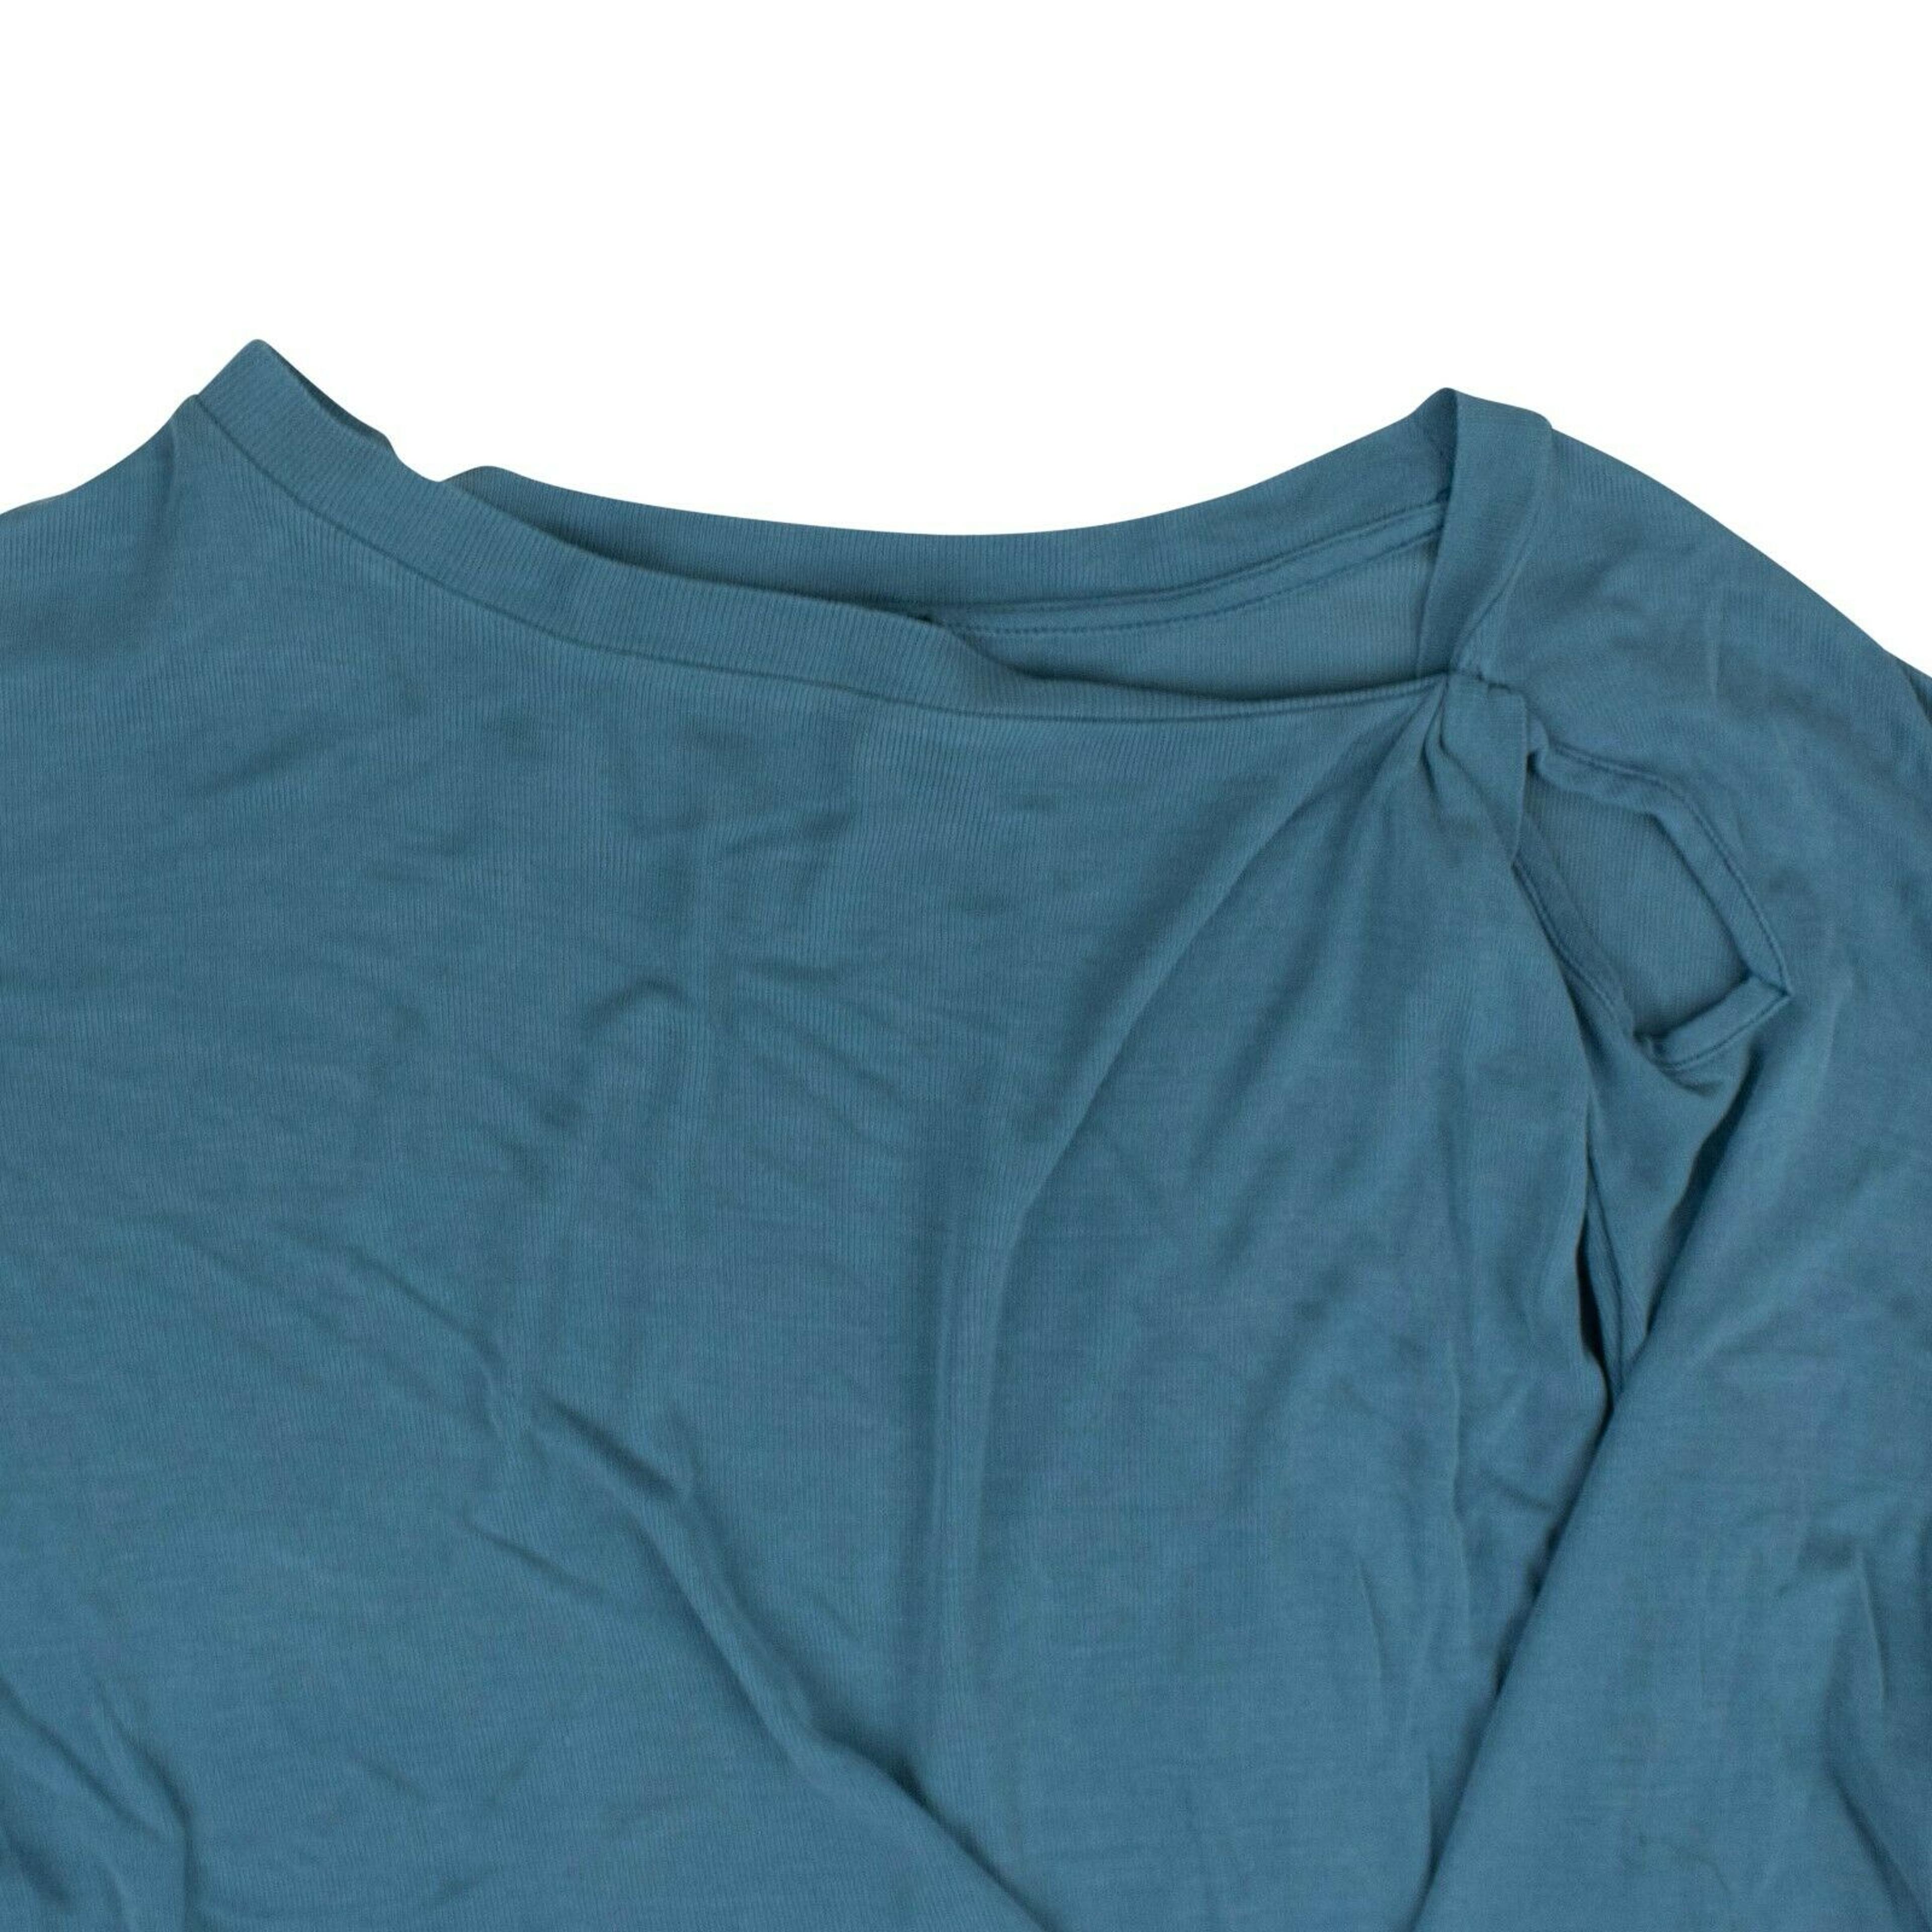 Alternate View 2 of Unravel Project Twist T-Shirt - Blue